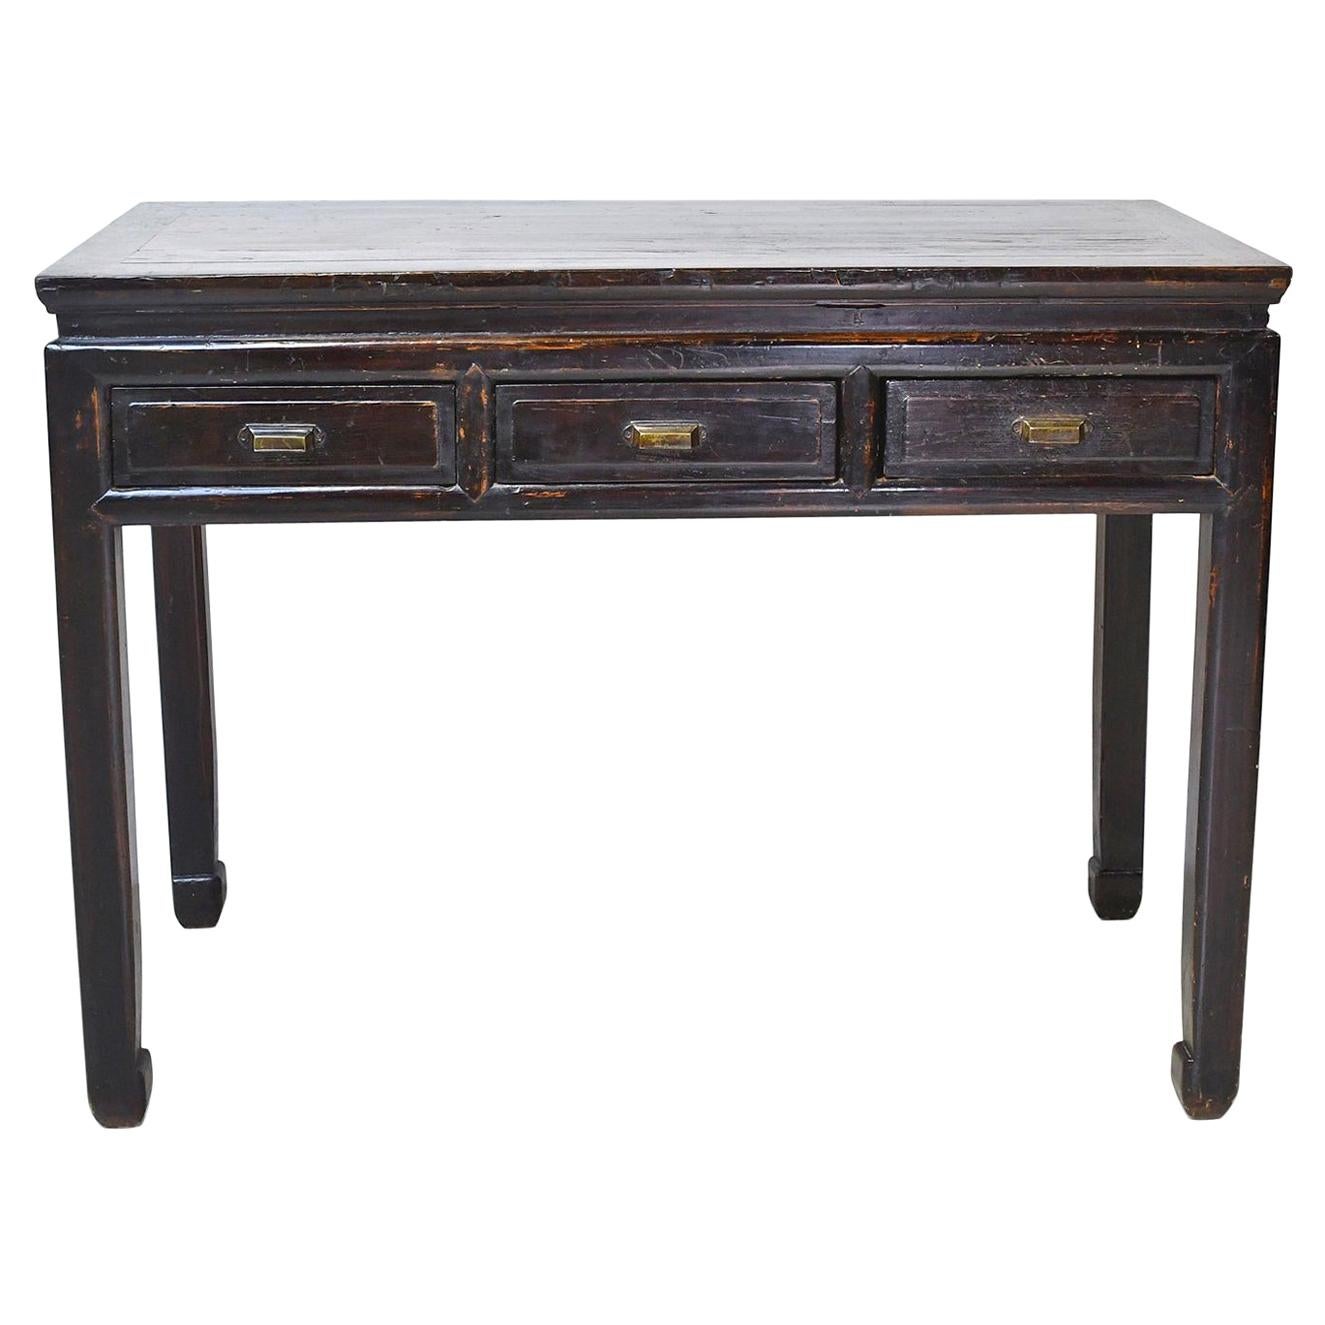 19th Century Qing Dynasty Chinese Sofa Table with Black Lacquer & Three Drawers